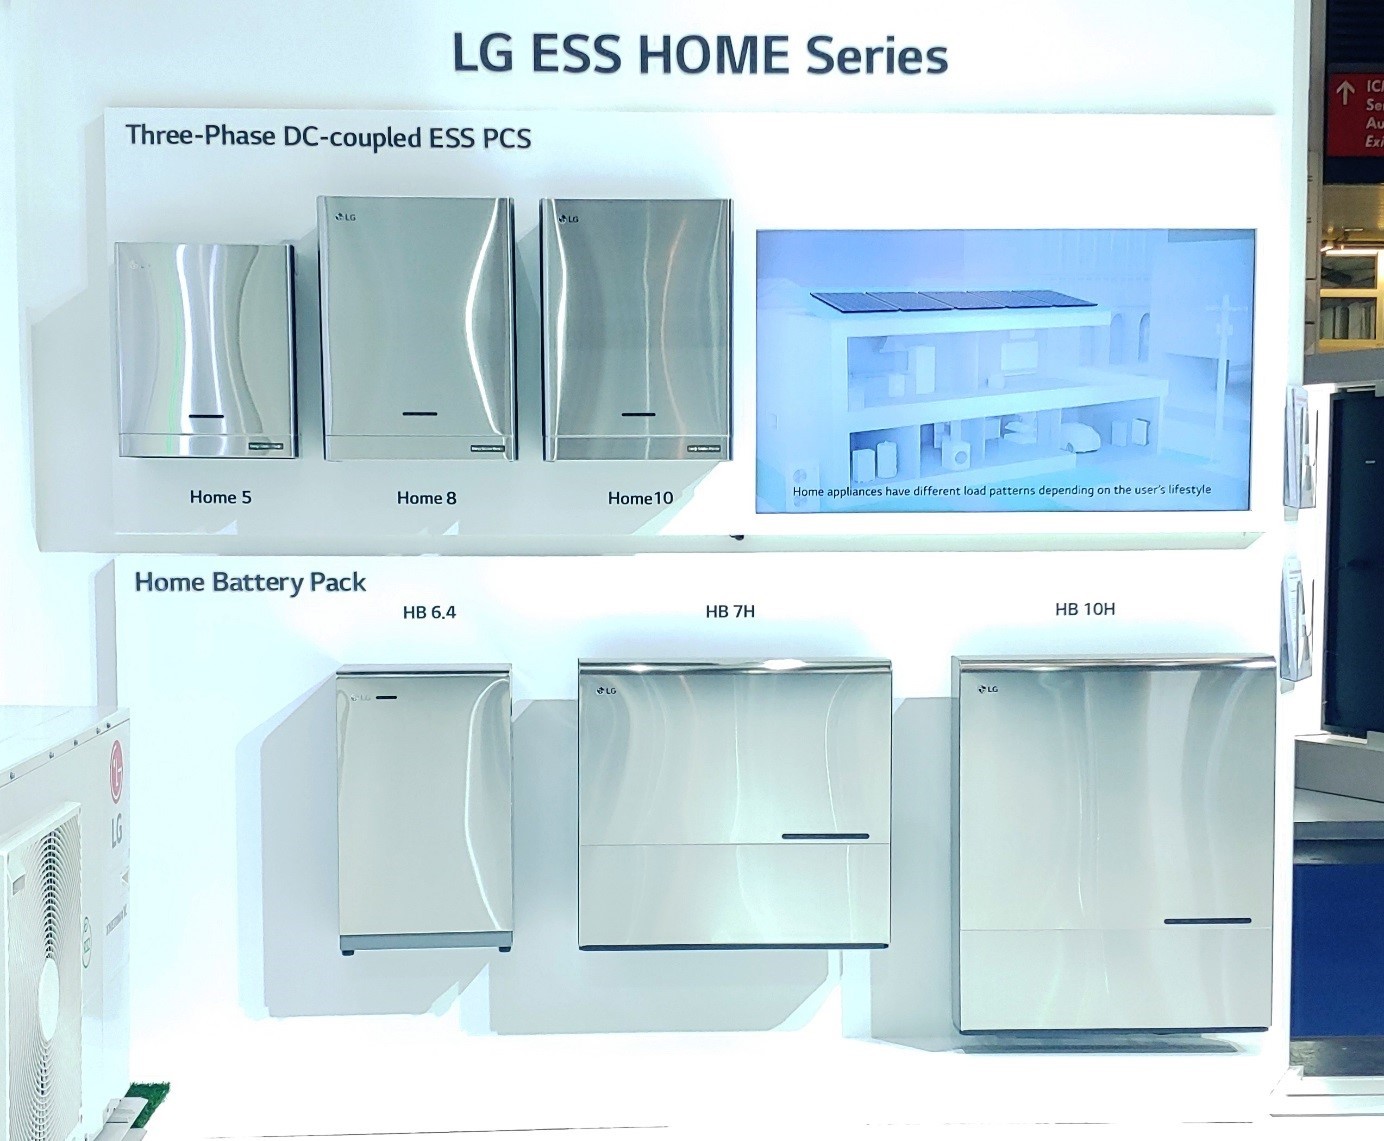 A promotional display of products in the LG ESS HOME Series lineup